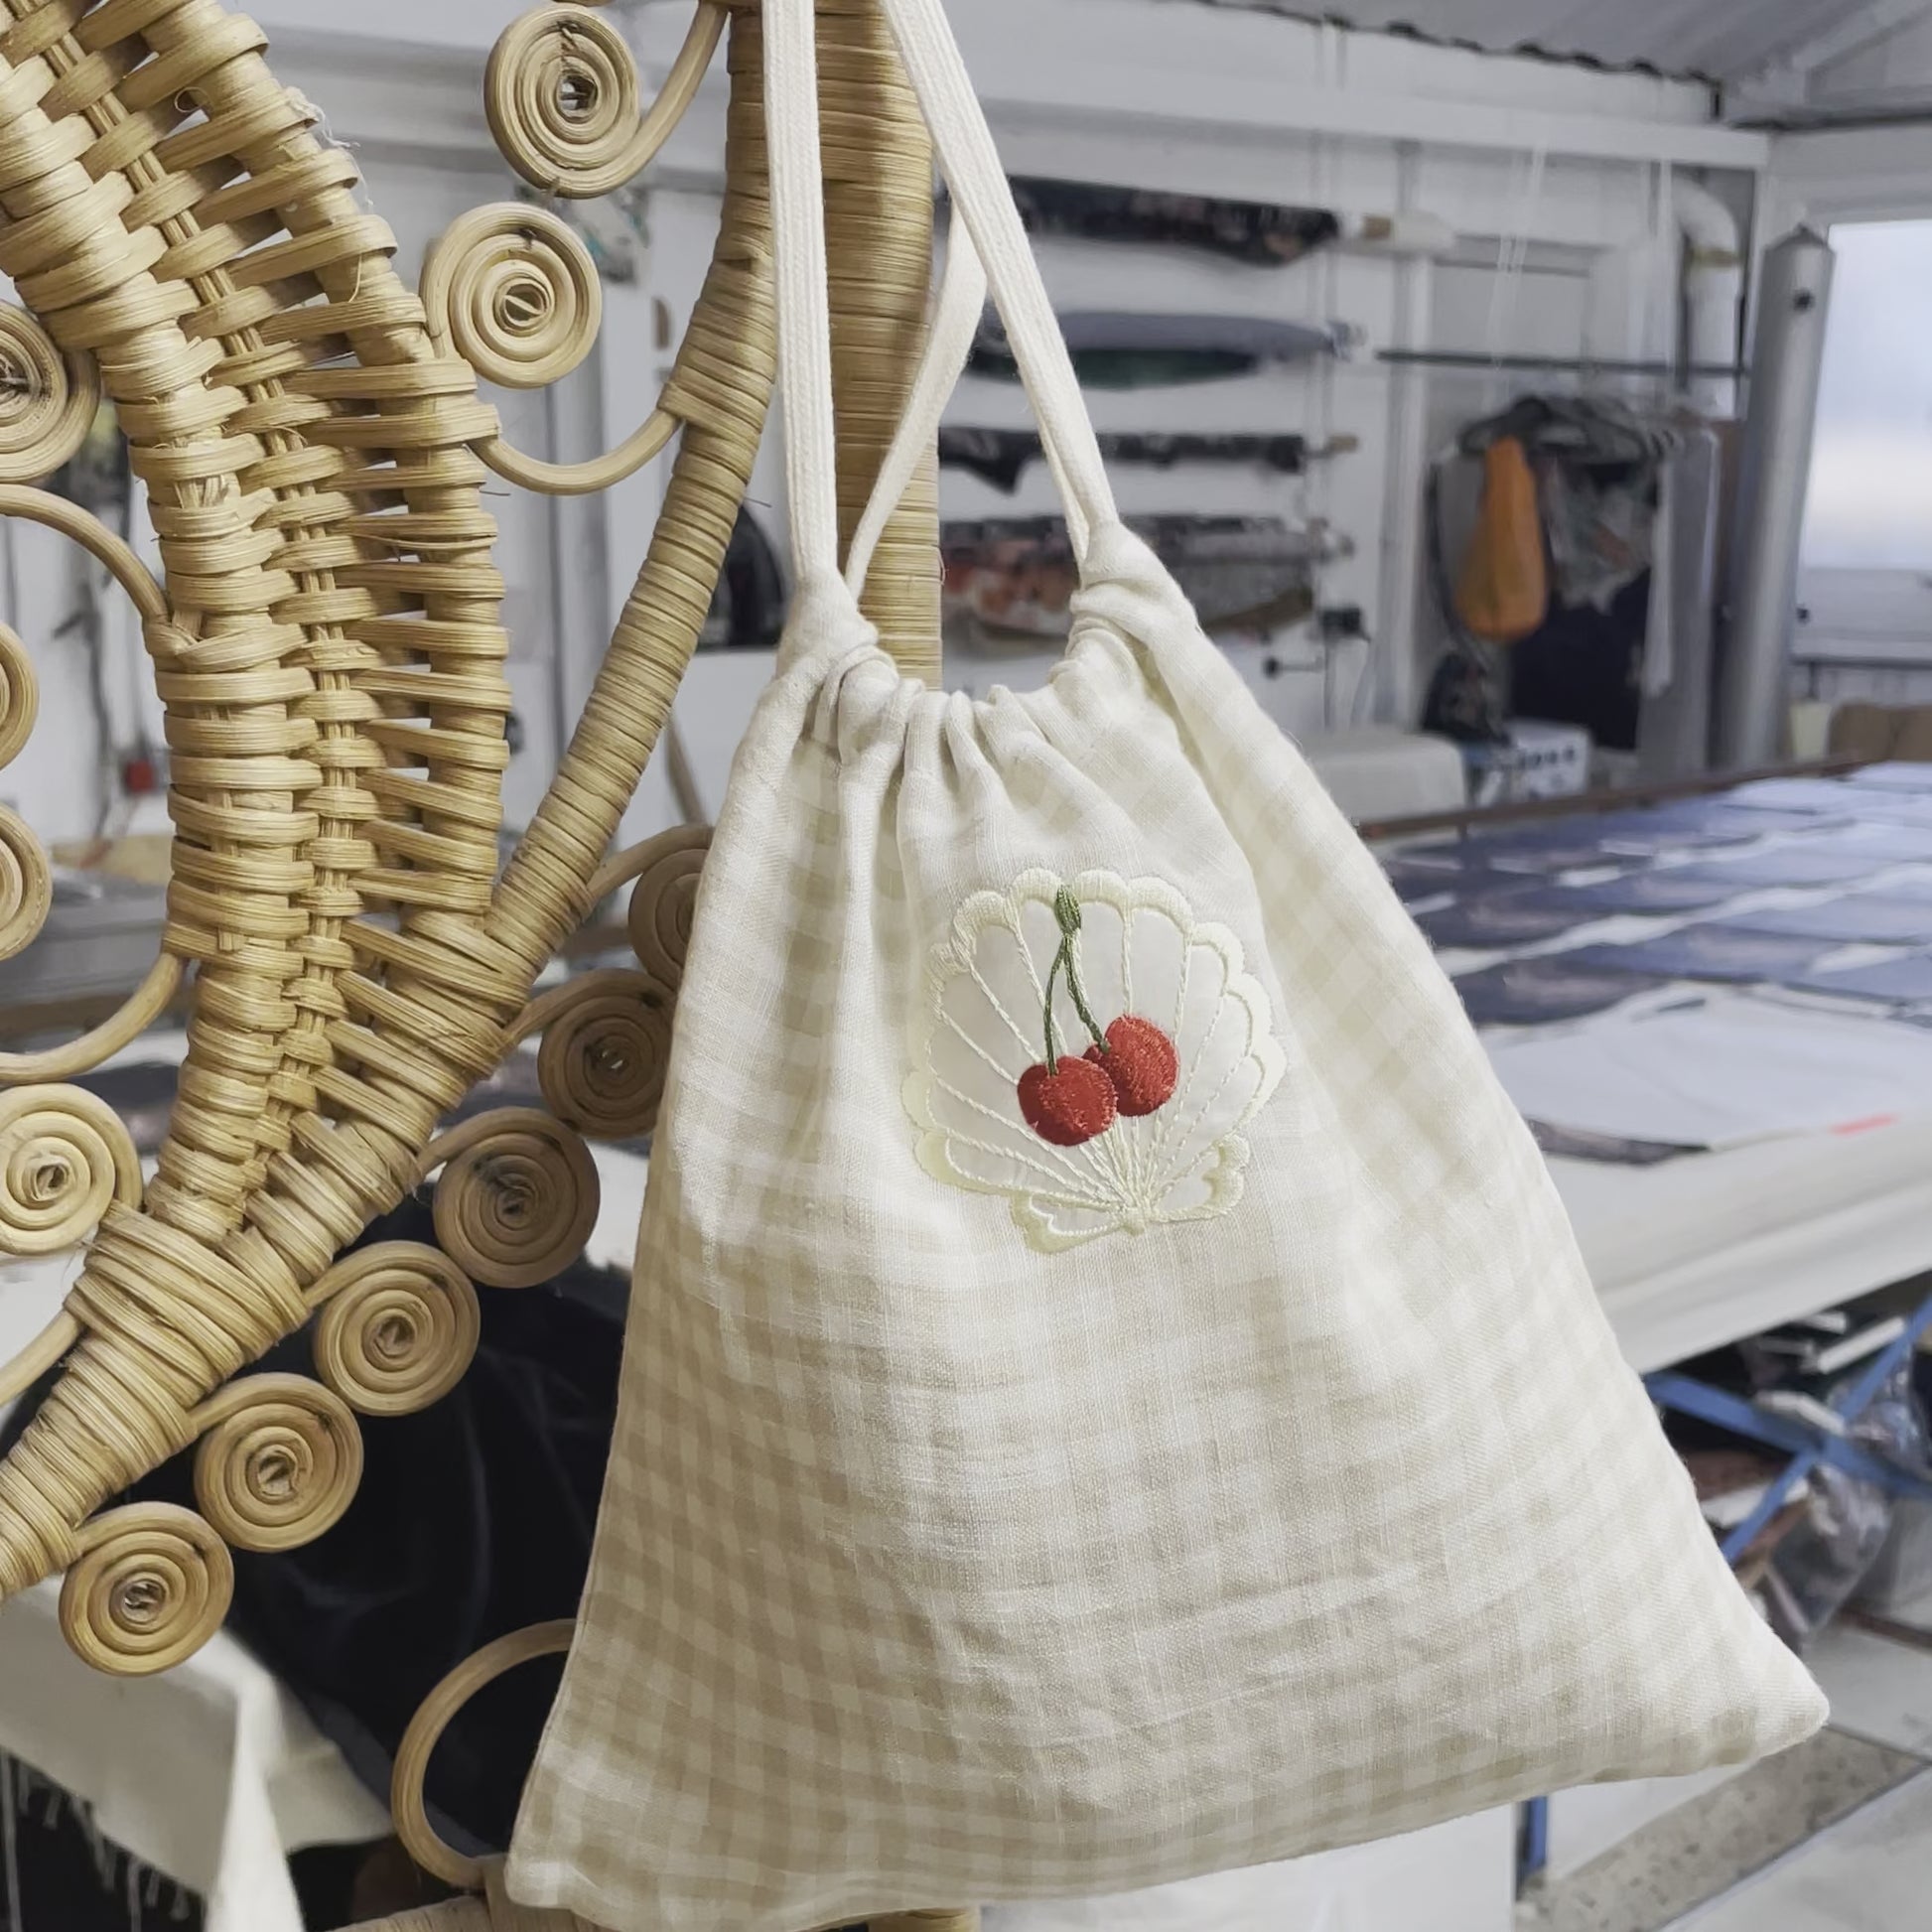 Video shows the linen bag with the camera zooming in on the cherry embroidery and a hand titling the bag for the camera. The bag is hanging on the corner of a rattan screen